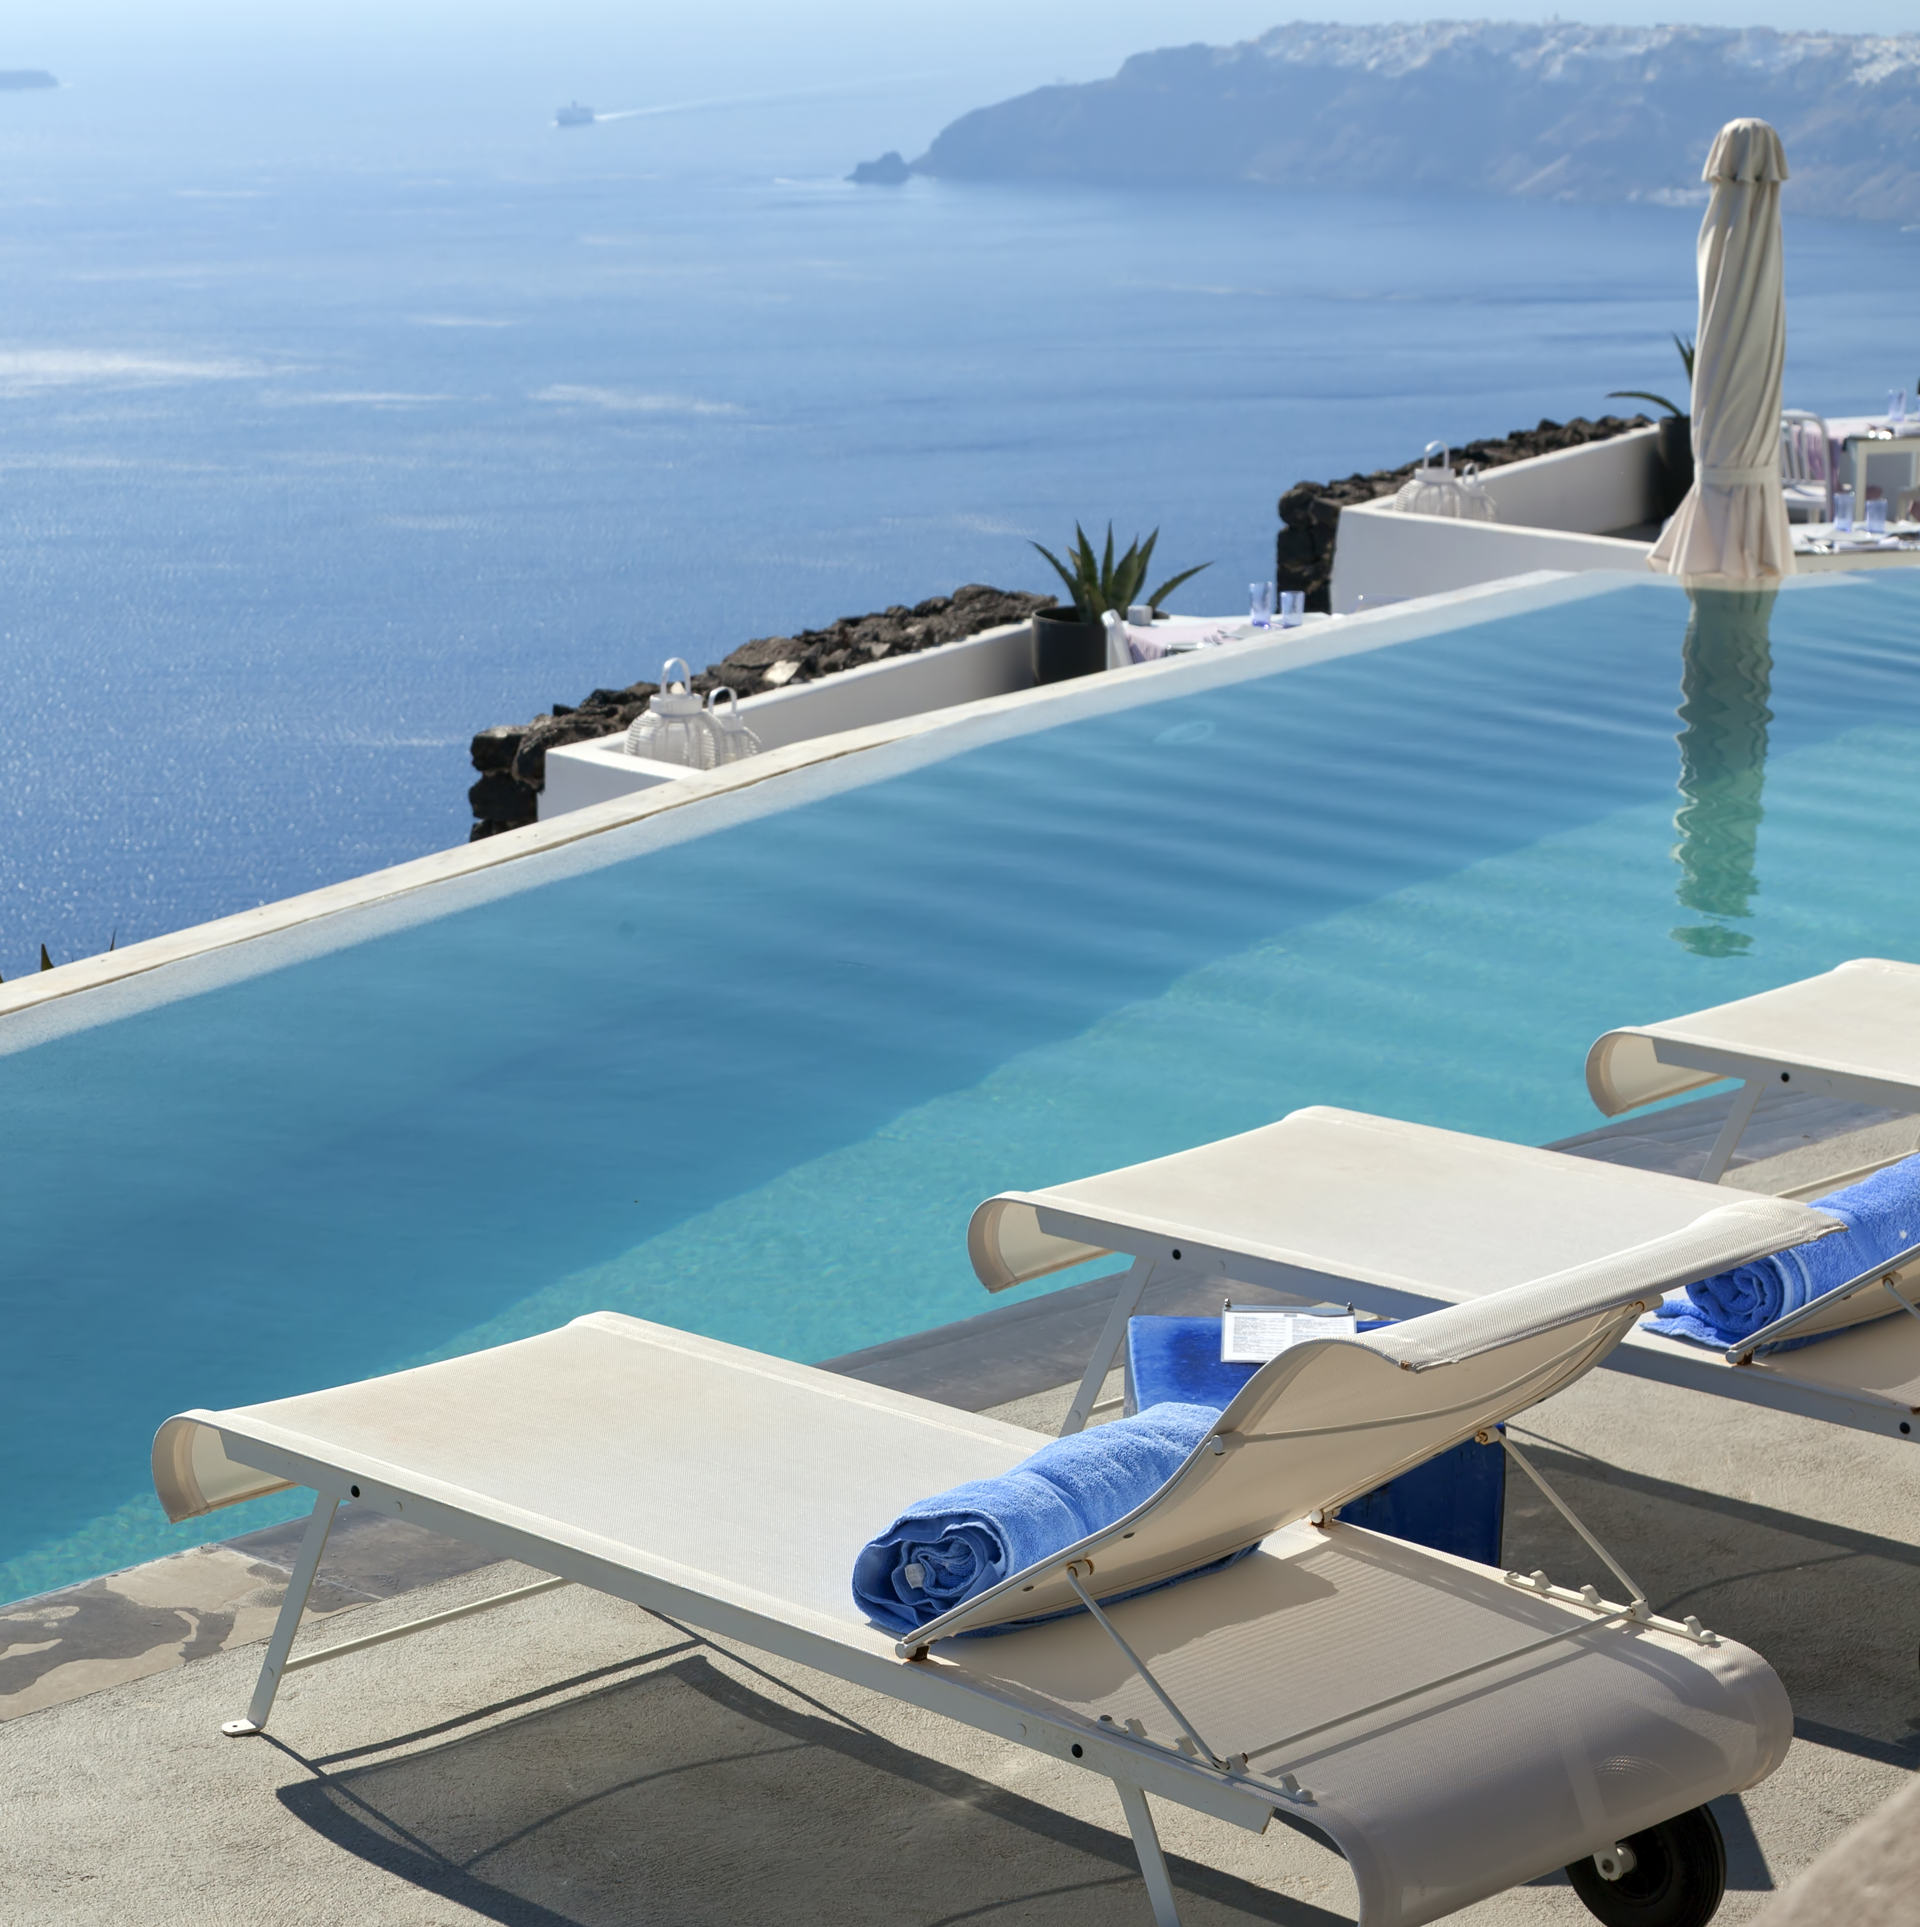 A luxury swimming pool situated in the town of Imerovigli on the Greek island of Santorini with a view of Oia in the distance.